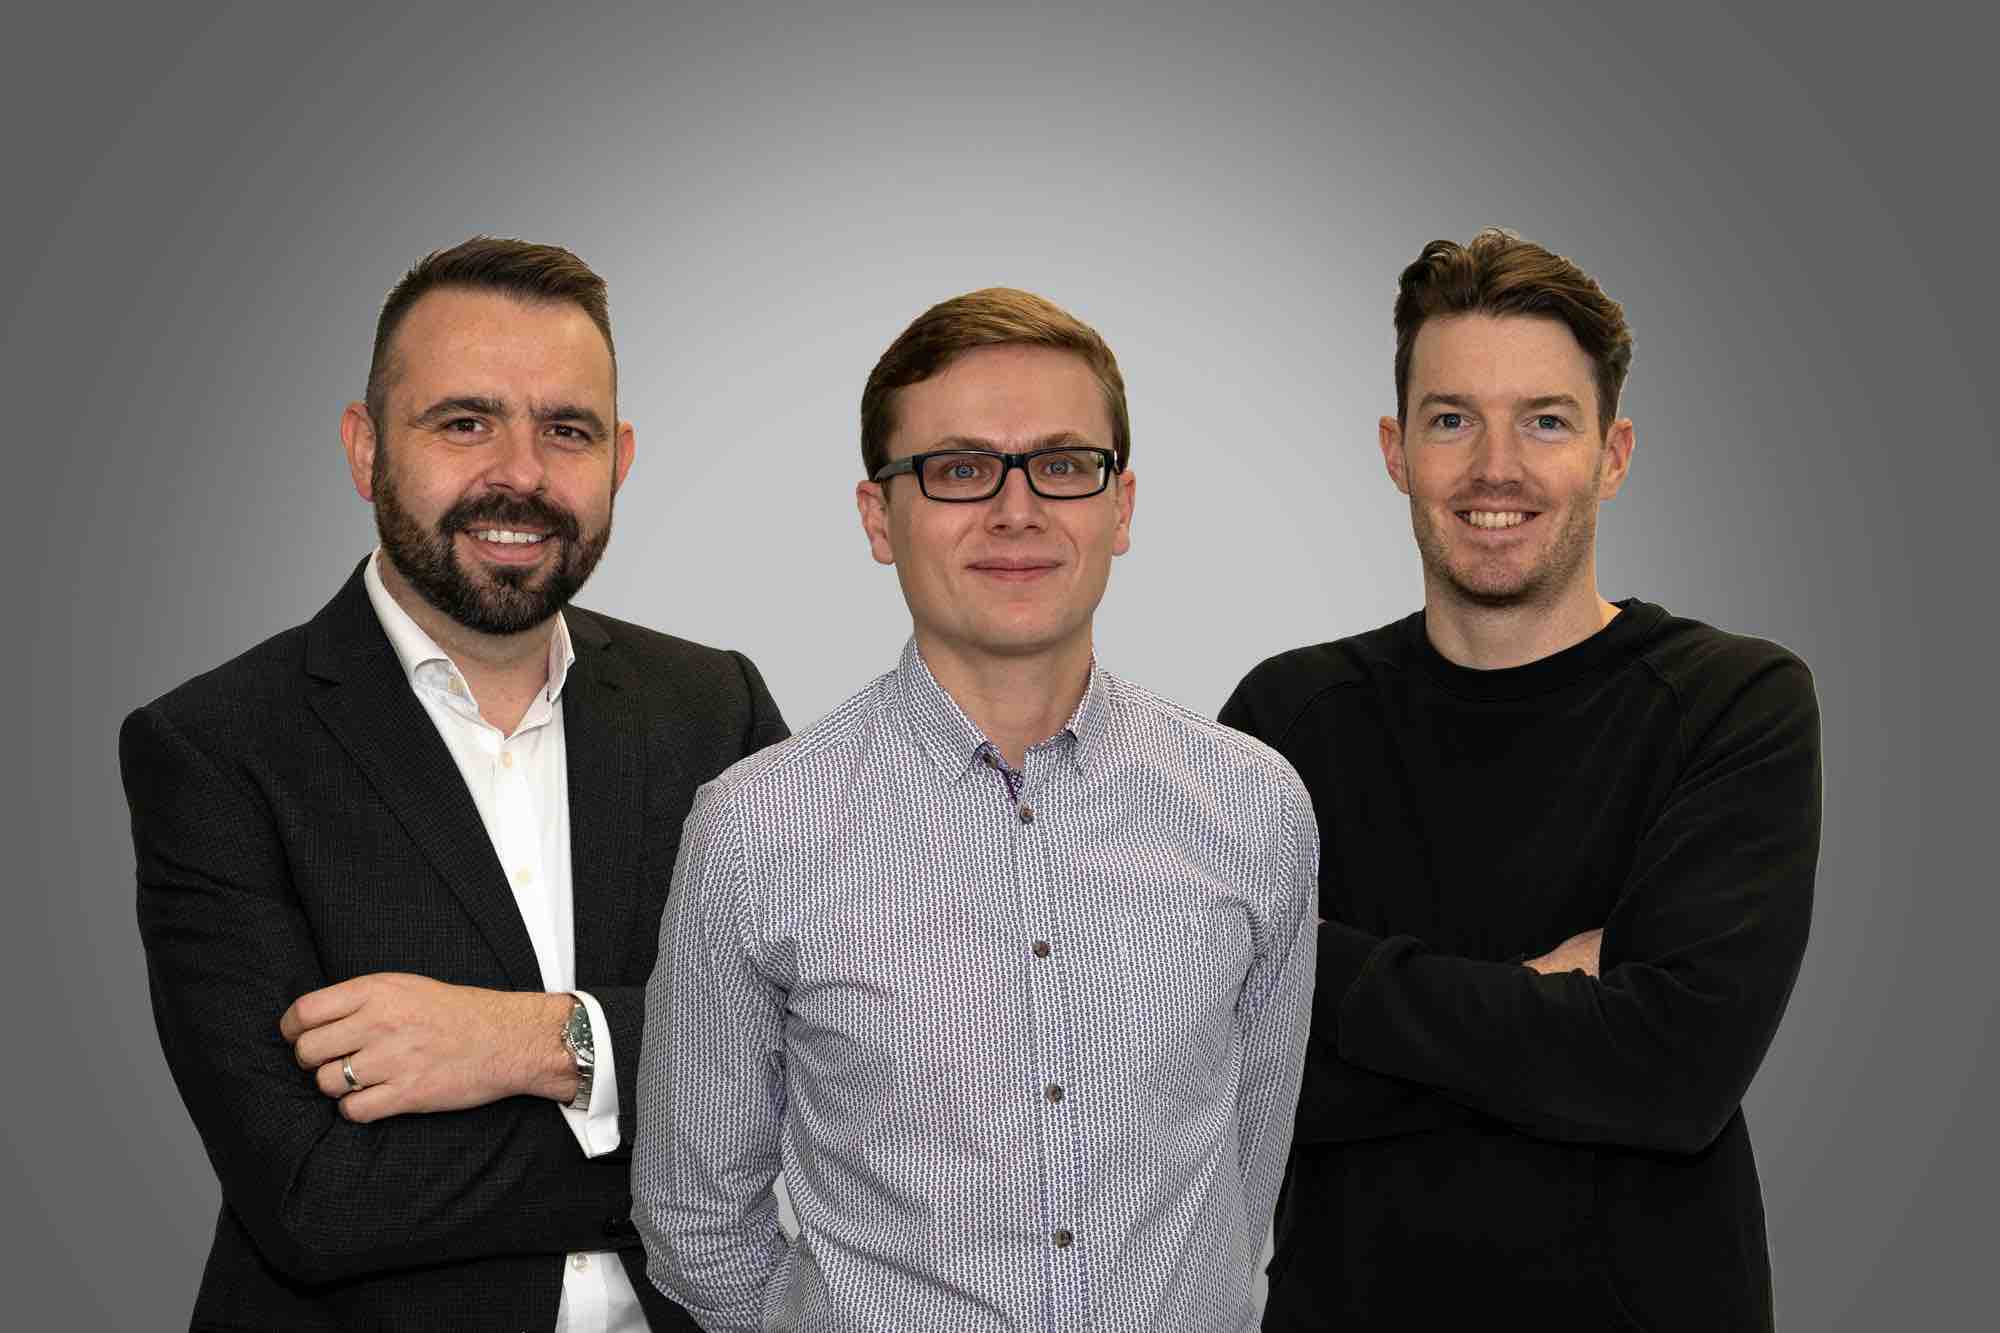  Miribase (t/a Shopblocks) secures £500k Seed funding from GMCA and DSW Angels